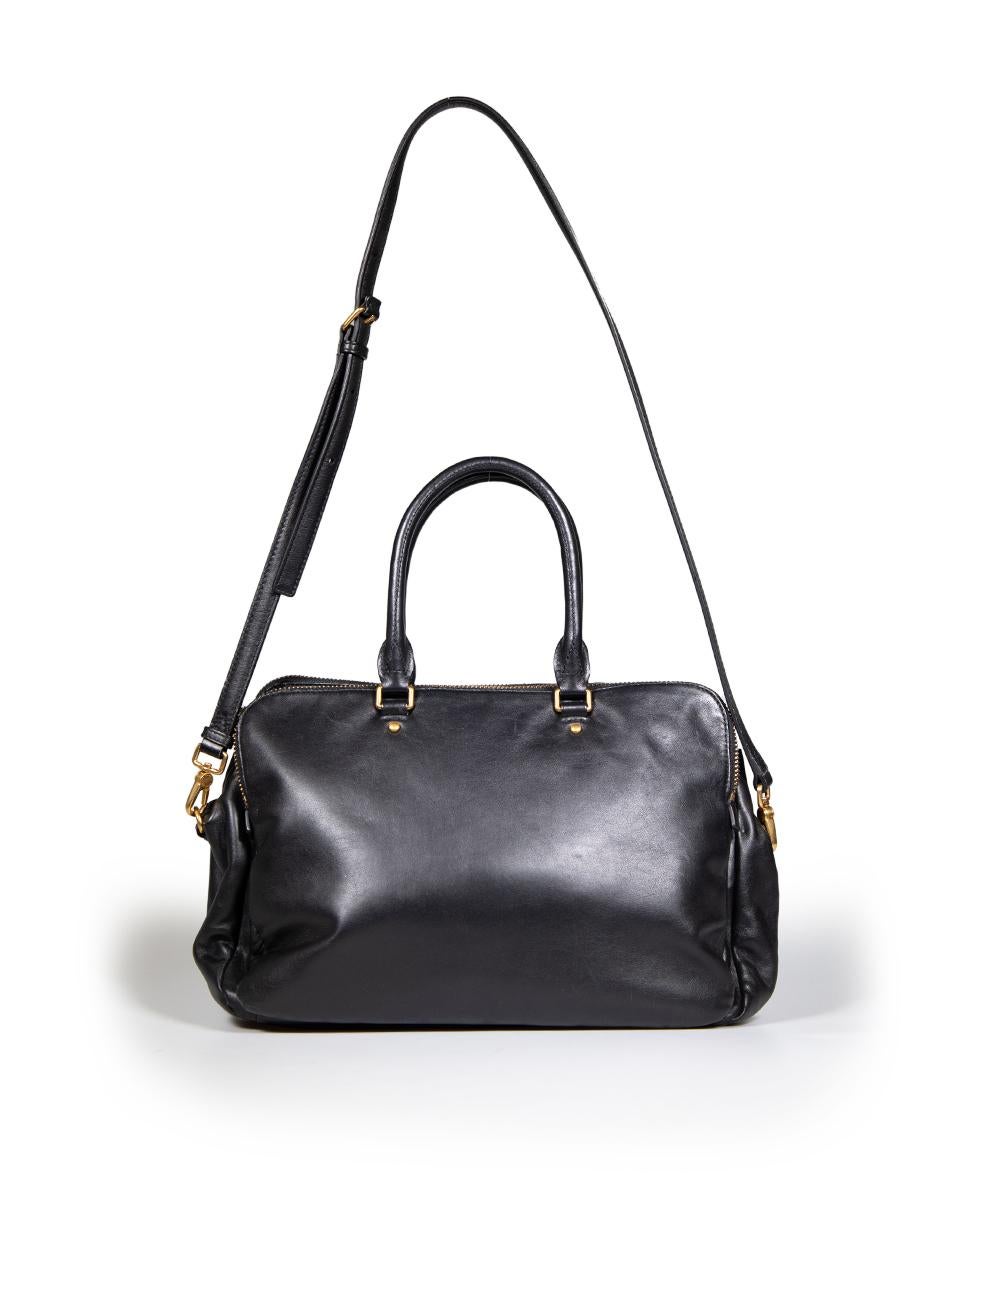 Marc Jacobs Marc By Marc Jacobs Black Leather Medium Handbag In Good Condition For Sale In London, GB